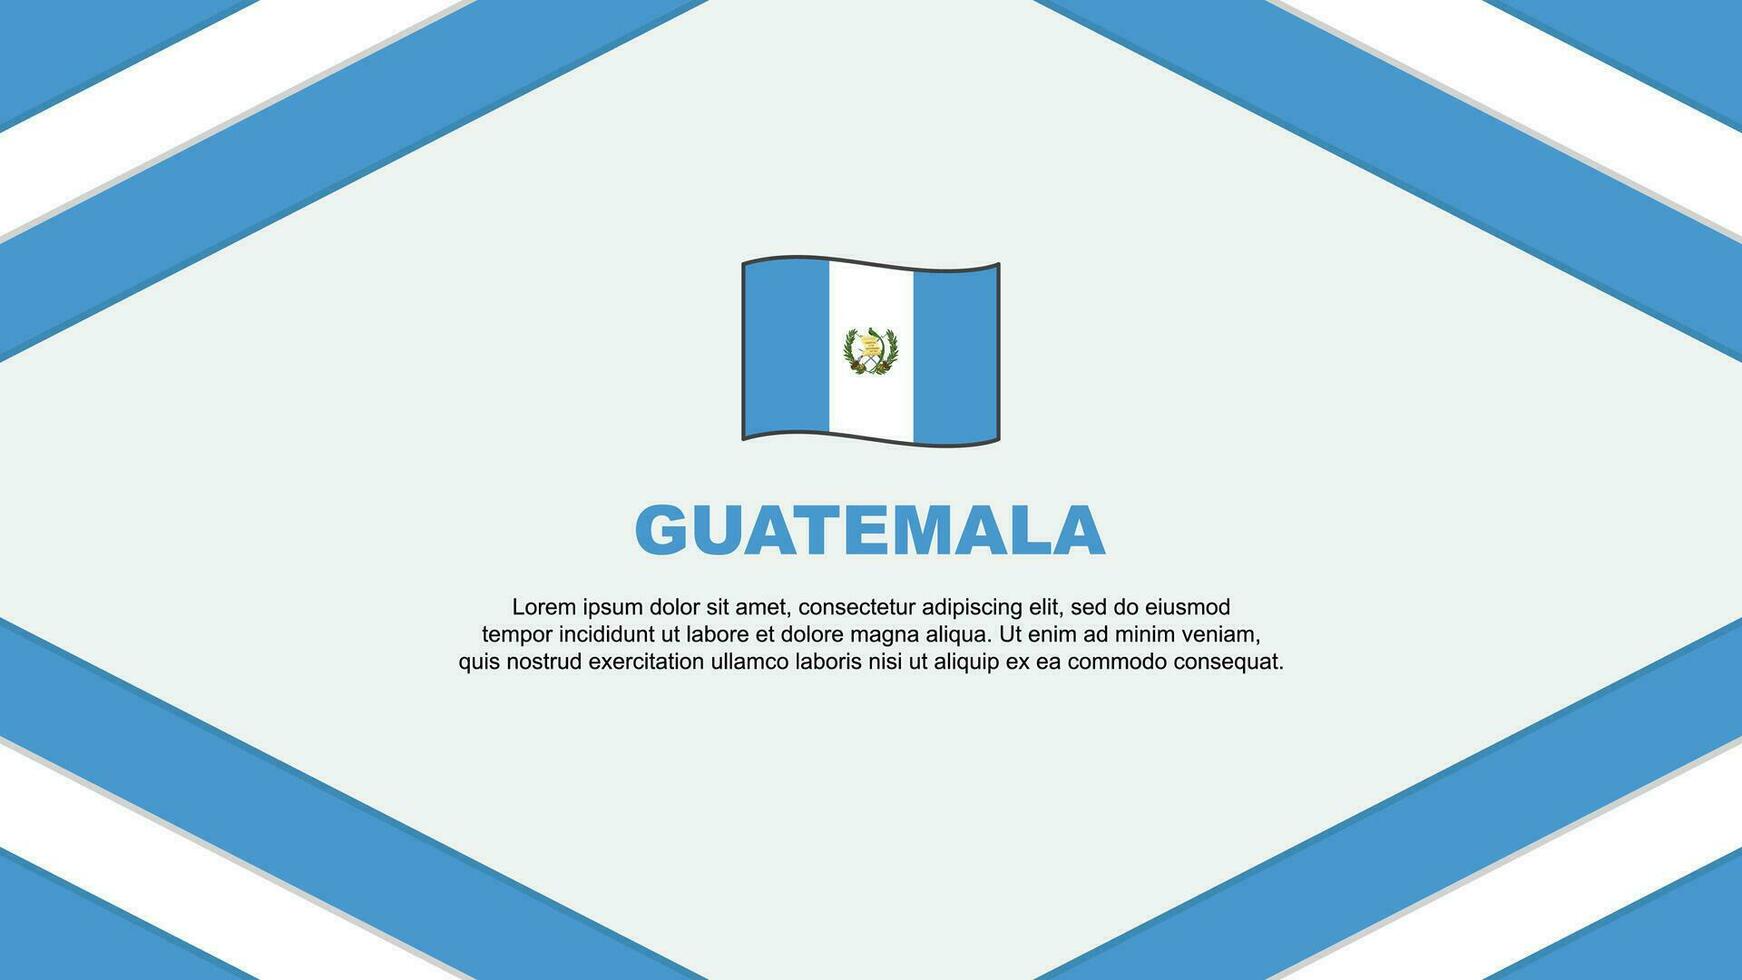 Guatemala Flag Abstract Background Design Template. Guatemala Independence Day Banner Cartoon Vector Illustration. Guatemala Template